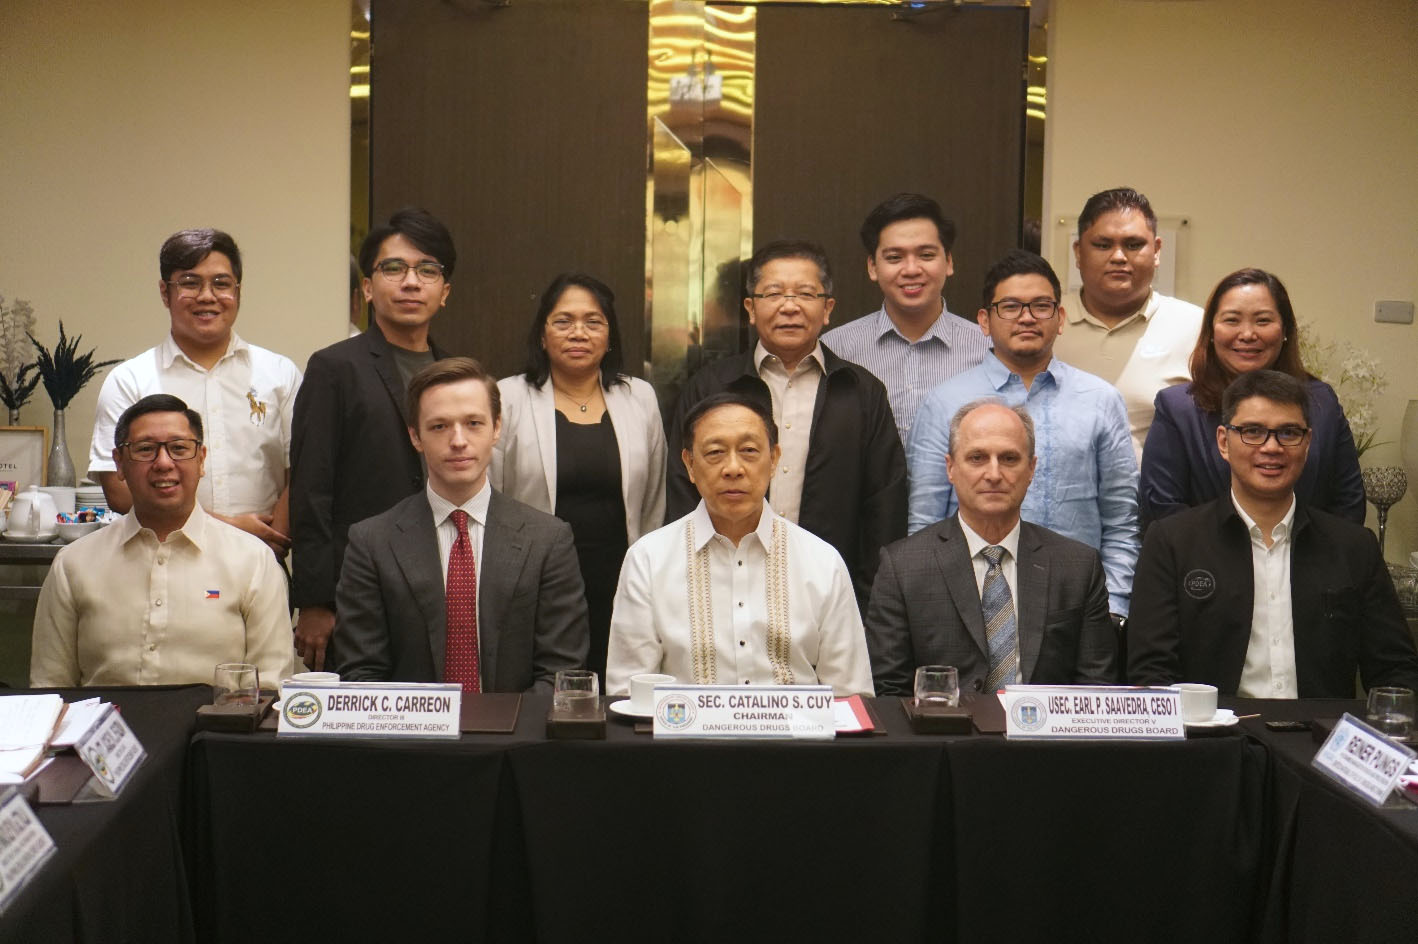 Reiner Pungs, UNODC Drugs and Precursors Programme Manager, and John Wojcik, Associate Programme Officer for Transnational Organized Crime, are joined by Secretary Catalino S. Cuy, Chairman of the Dangerous Drugs Board, Undersecretary Earl P. Saavedra, and Director Derrick Carreon of the Philippine Drug Enforcement Agency, together with other senior officers.